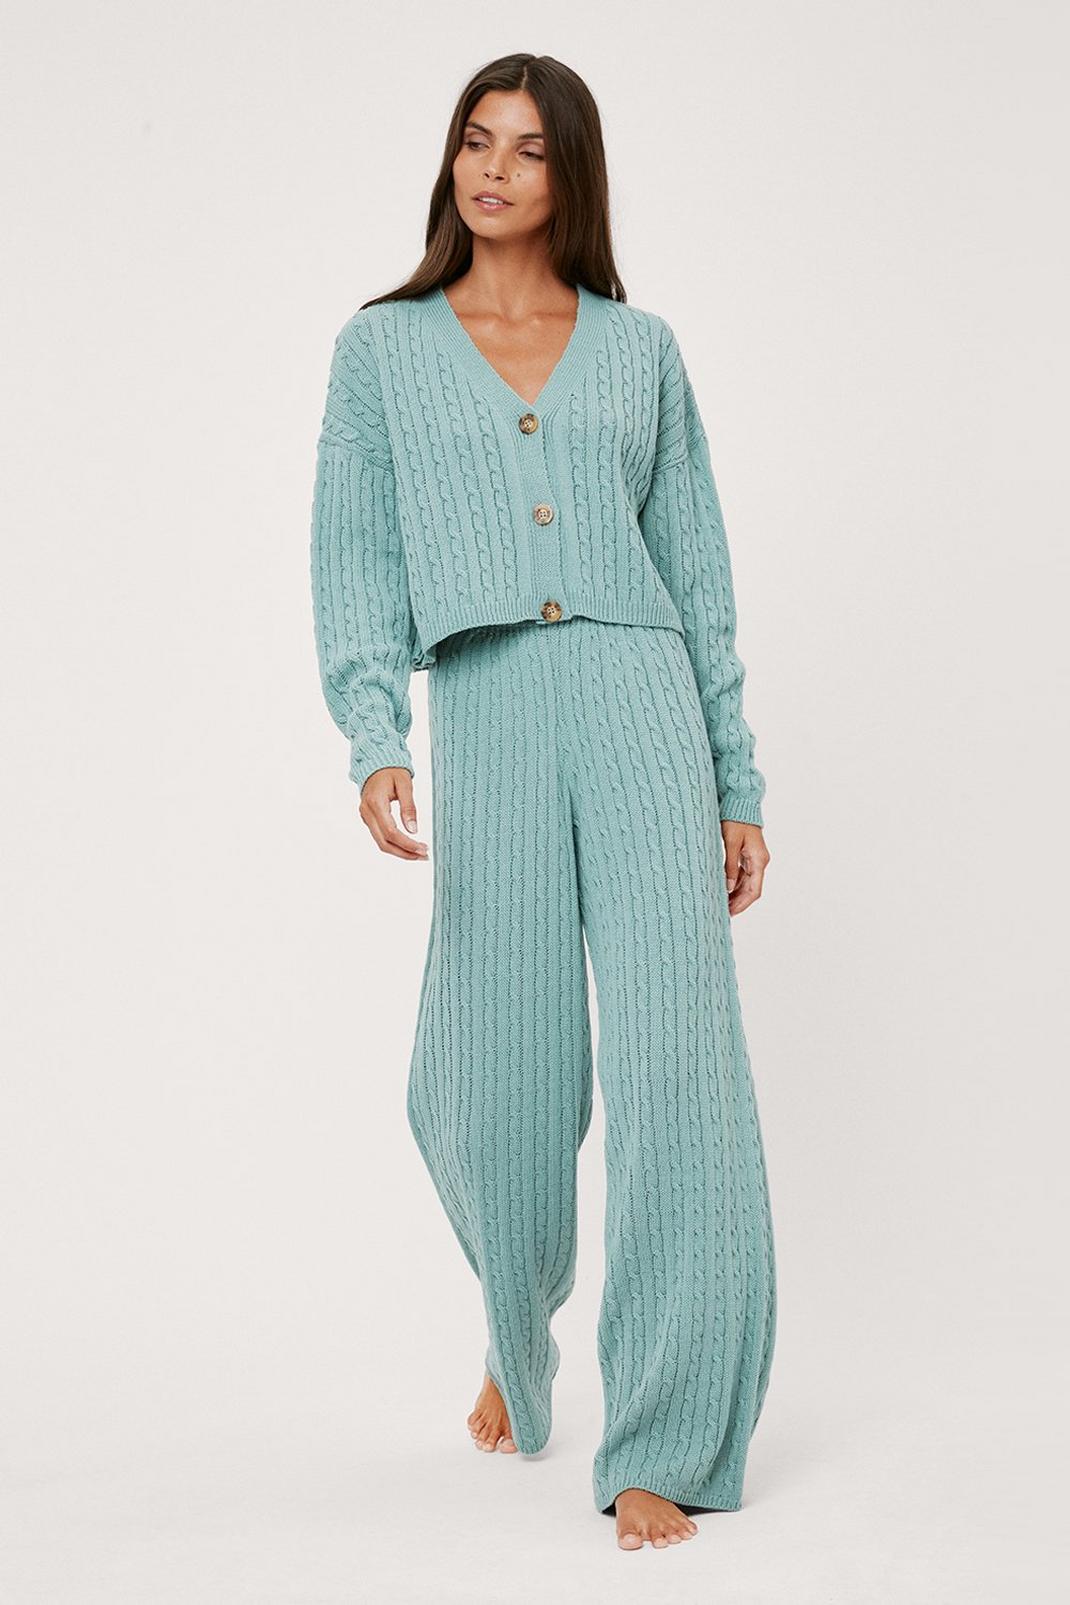 Green Cable Knit Wide Leg Pants Loungewear Set image number 1